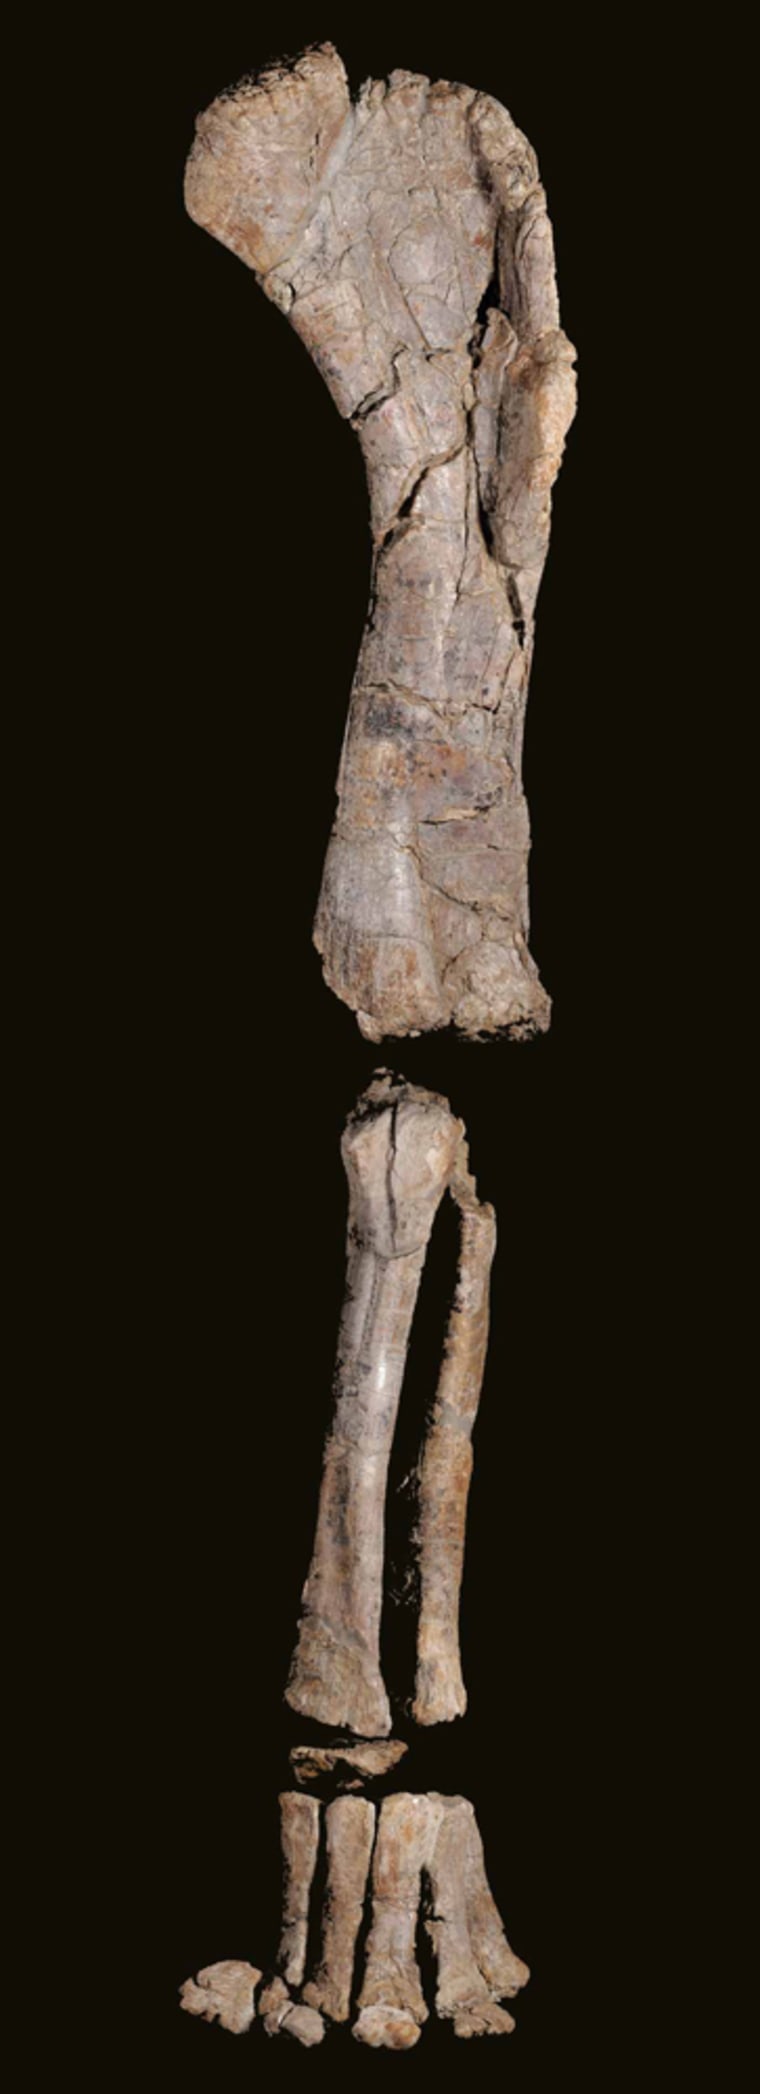 Left forelimb of the sauropod (3.5 meters tall).